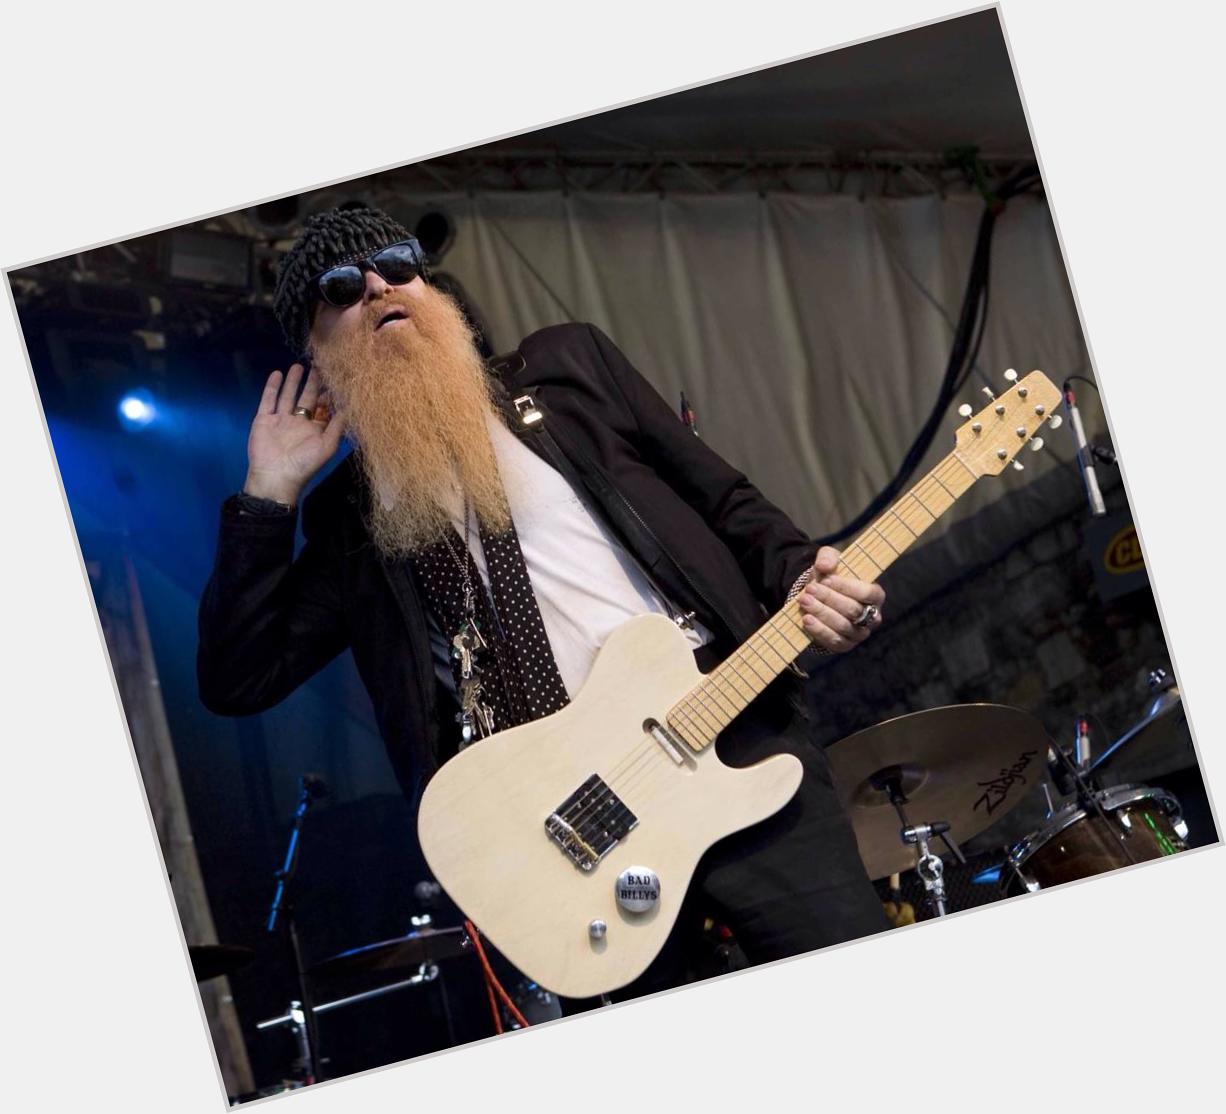 A Very Happy 65th Birthday to Guitarist William Frederick Billy Gibbons!
The true Reverend of  